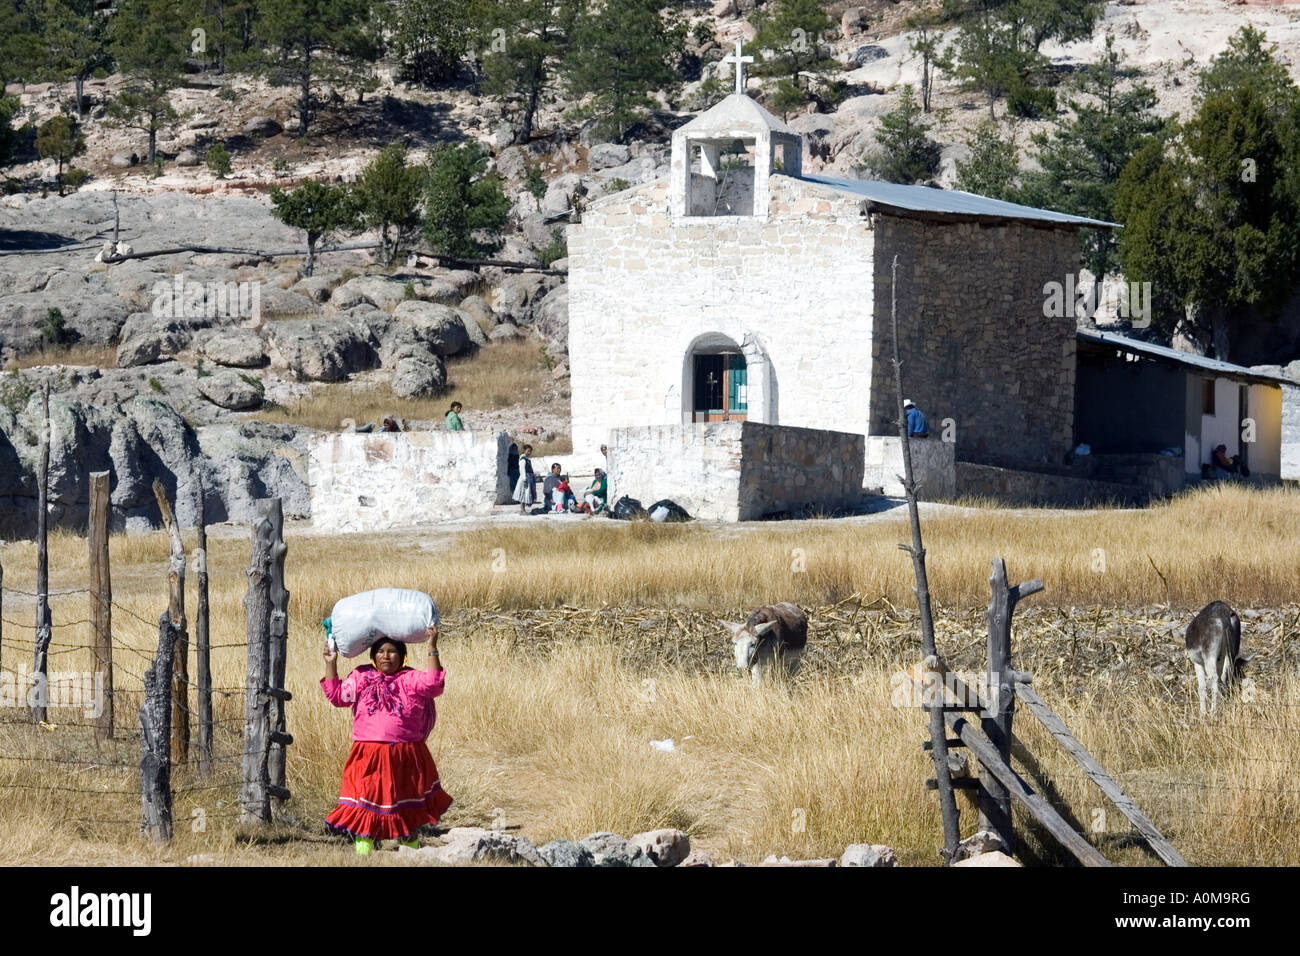 Tarahumara woman carrying goods just delivered at Mission San Luis Majimachi in the Sierra Tarahumara near Copper Canyon Stock Photo